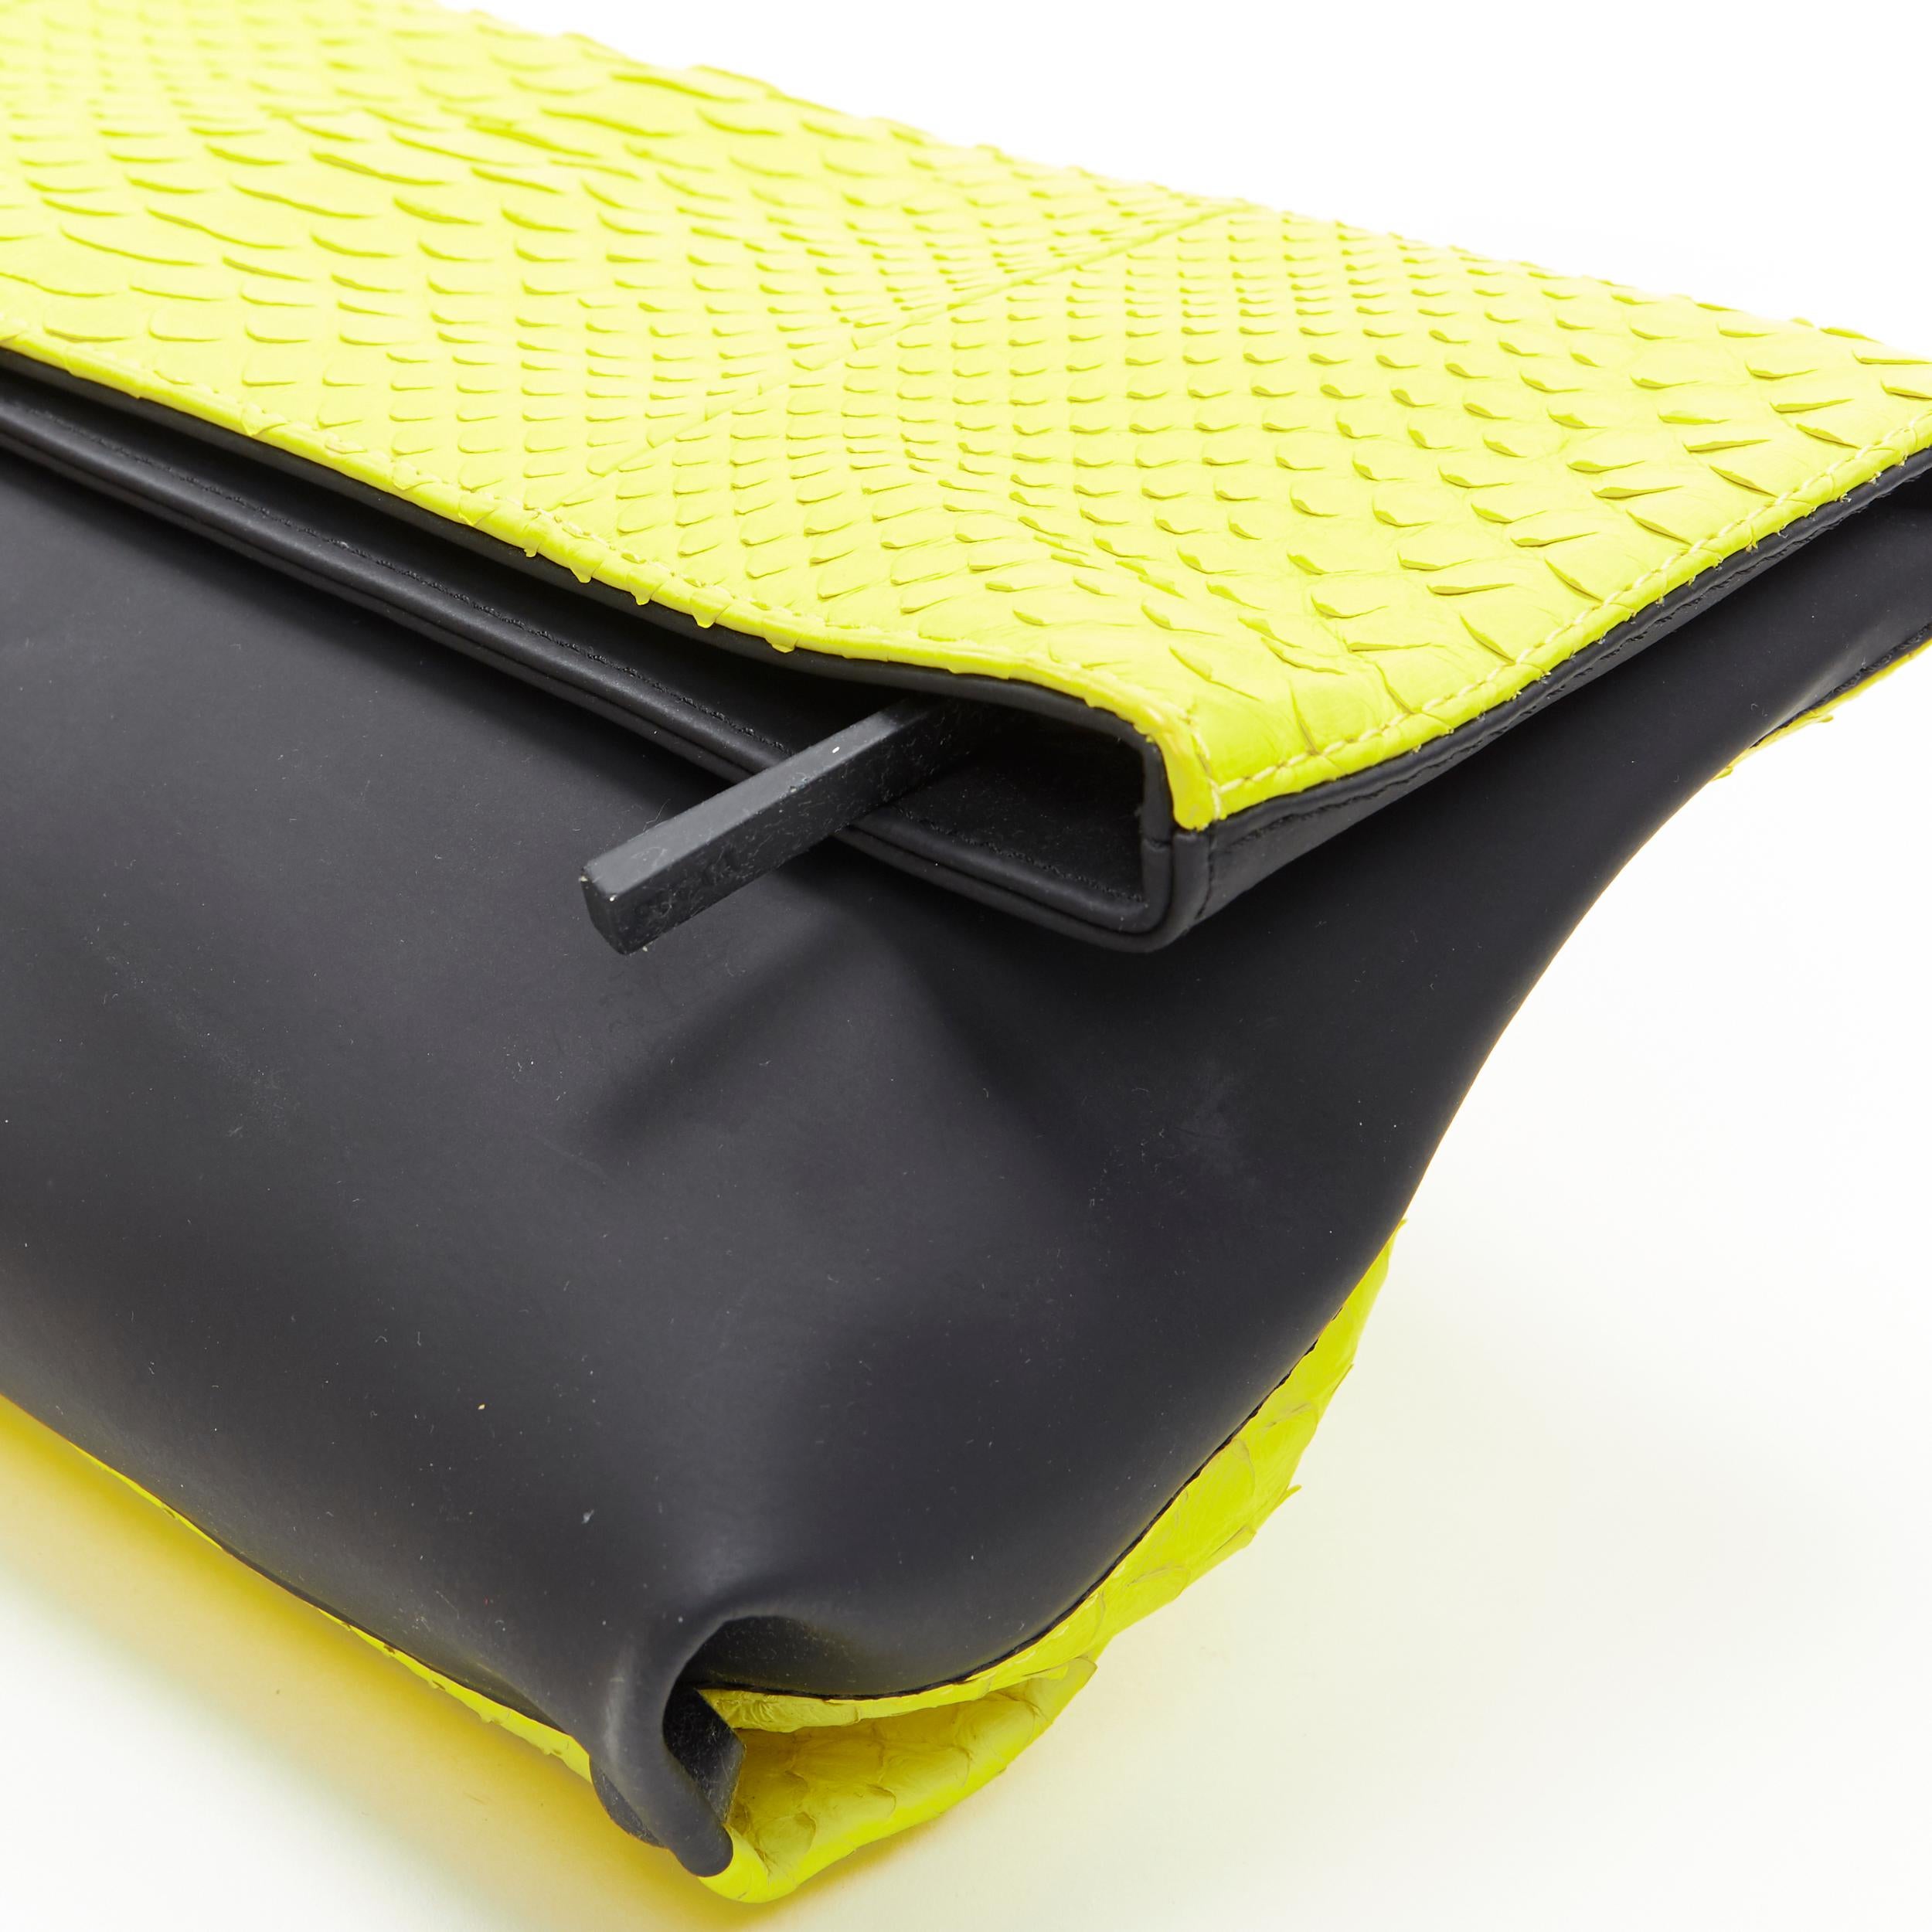 Black EMILIO PUCCI neon yellow scaled pleather black rubber fold over clutch bag